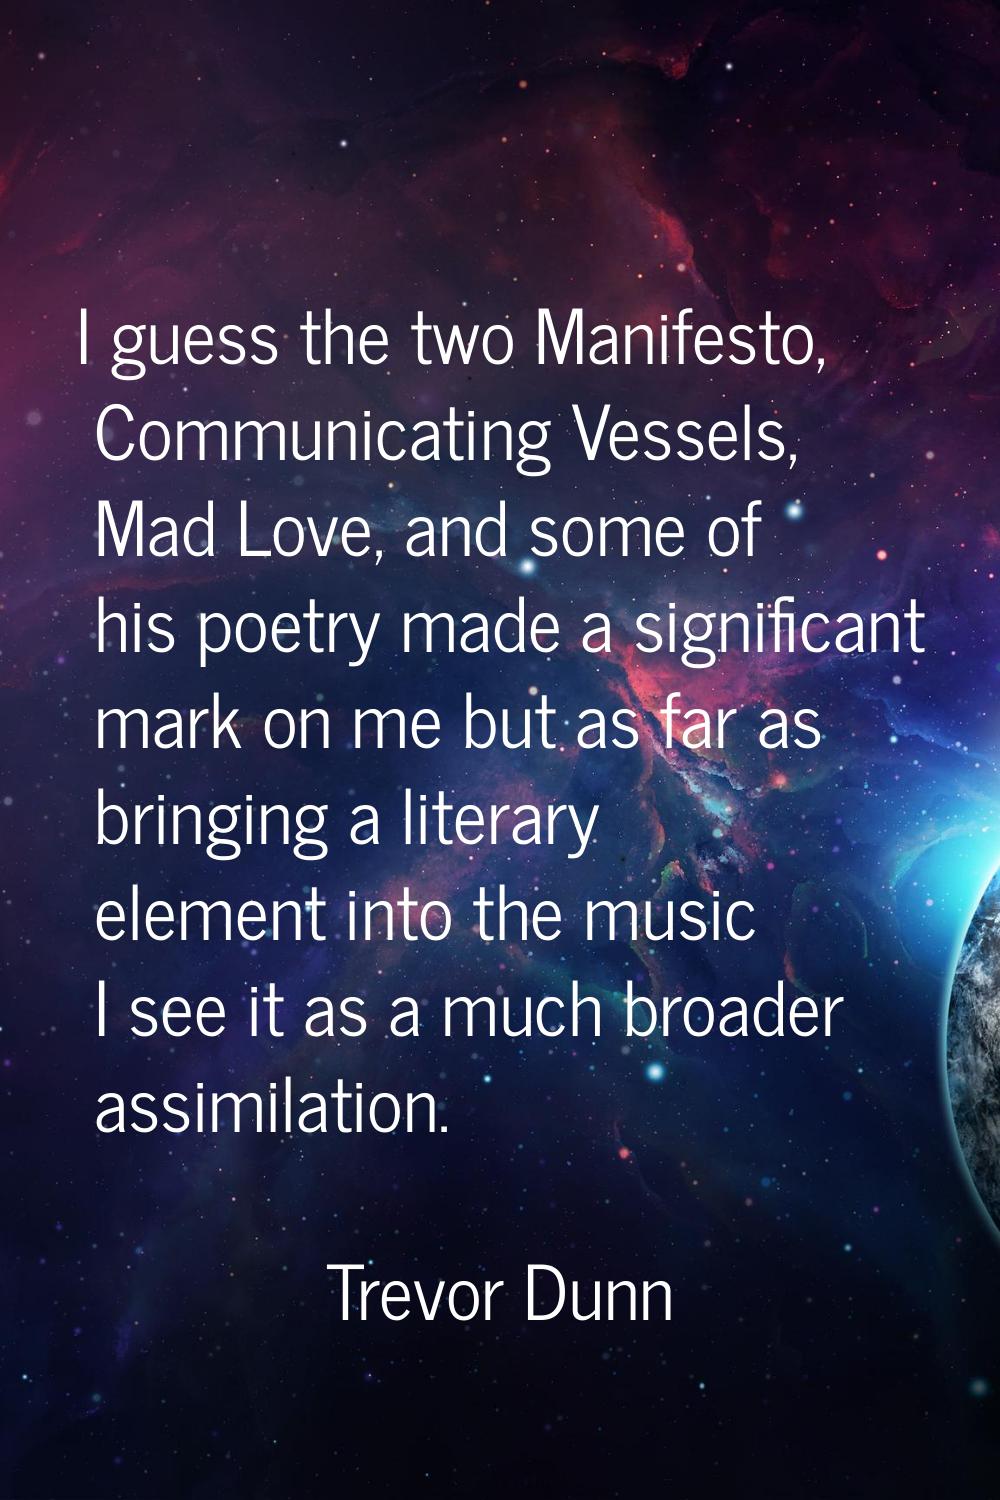 I guess the two Manifesto, Communicating Vessels, Mad Love, and some of his poetry made a significa